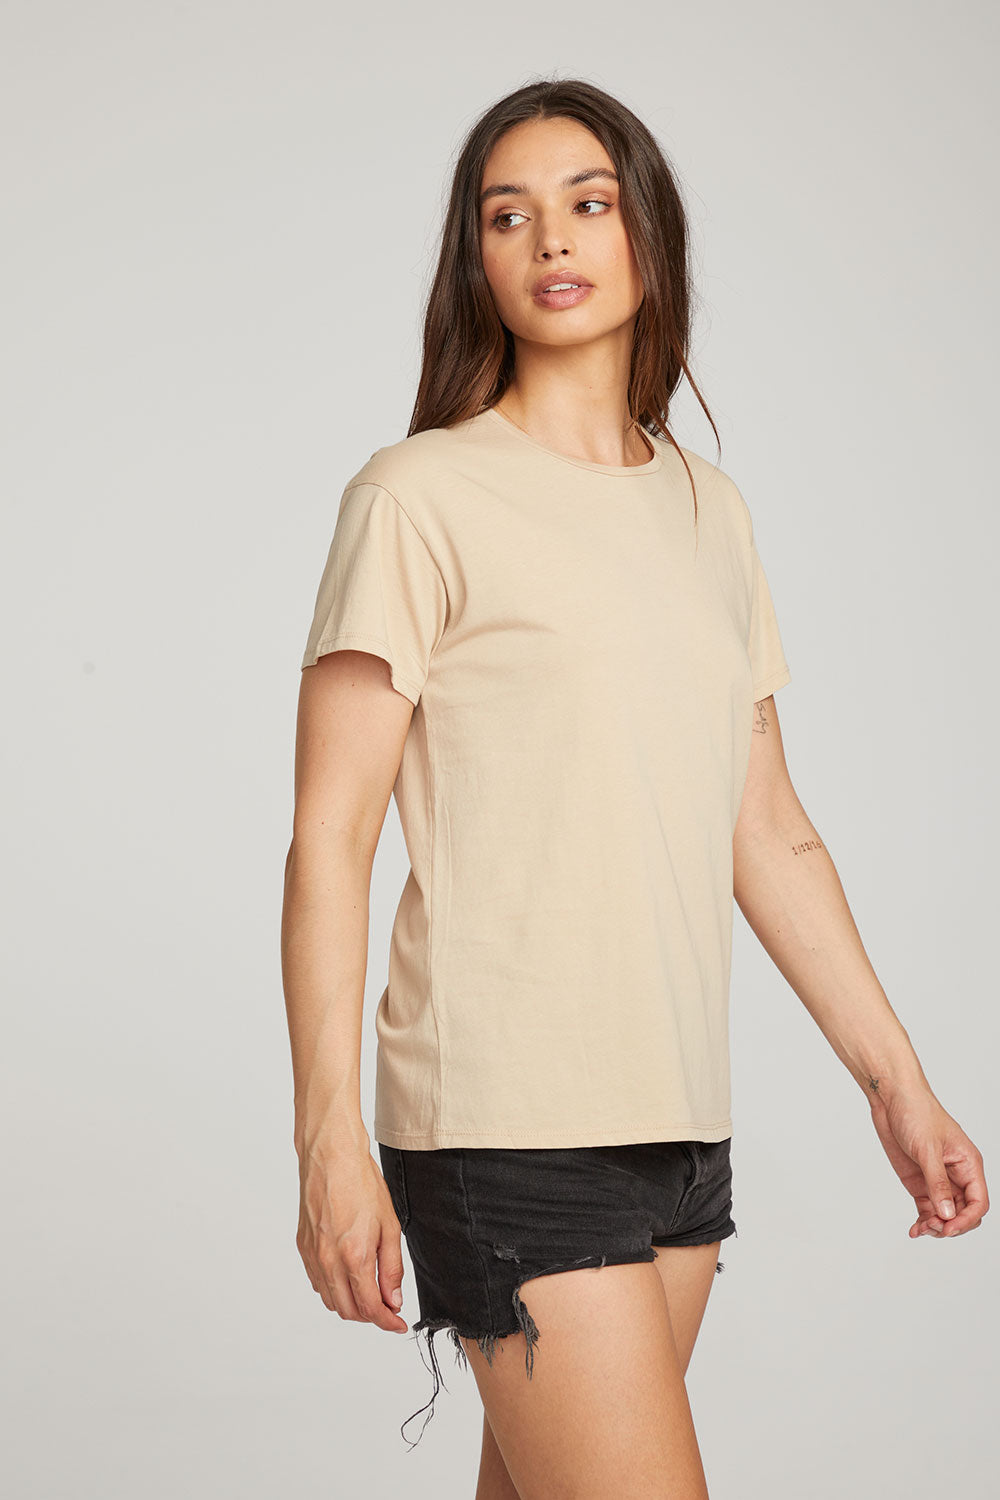 Everyday Essential Cappuccino Crew Neck Tee WOMENS chaserbrand